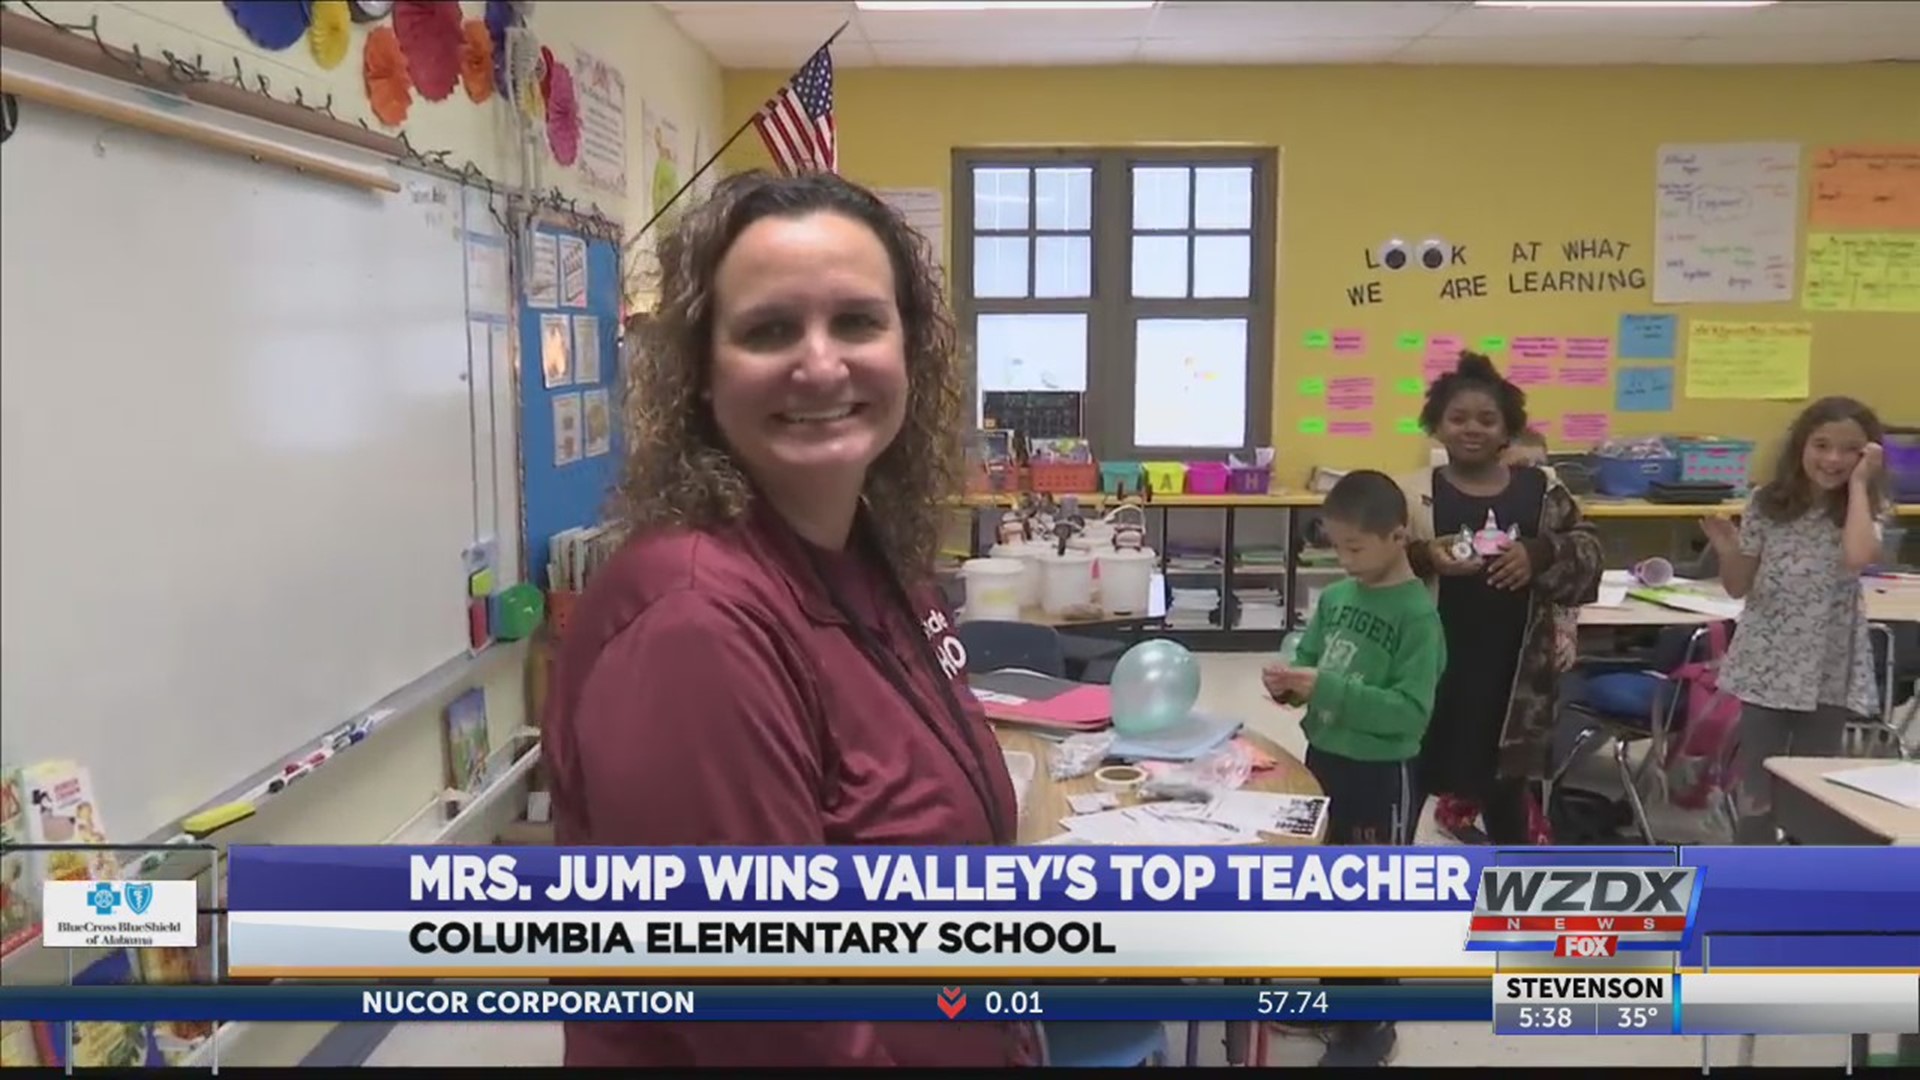 Our Valley’s Top Teacher has been shaping the minds of kids at Columbia Elementary School in Madison ever since it opened fifteen years ago.